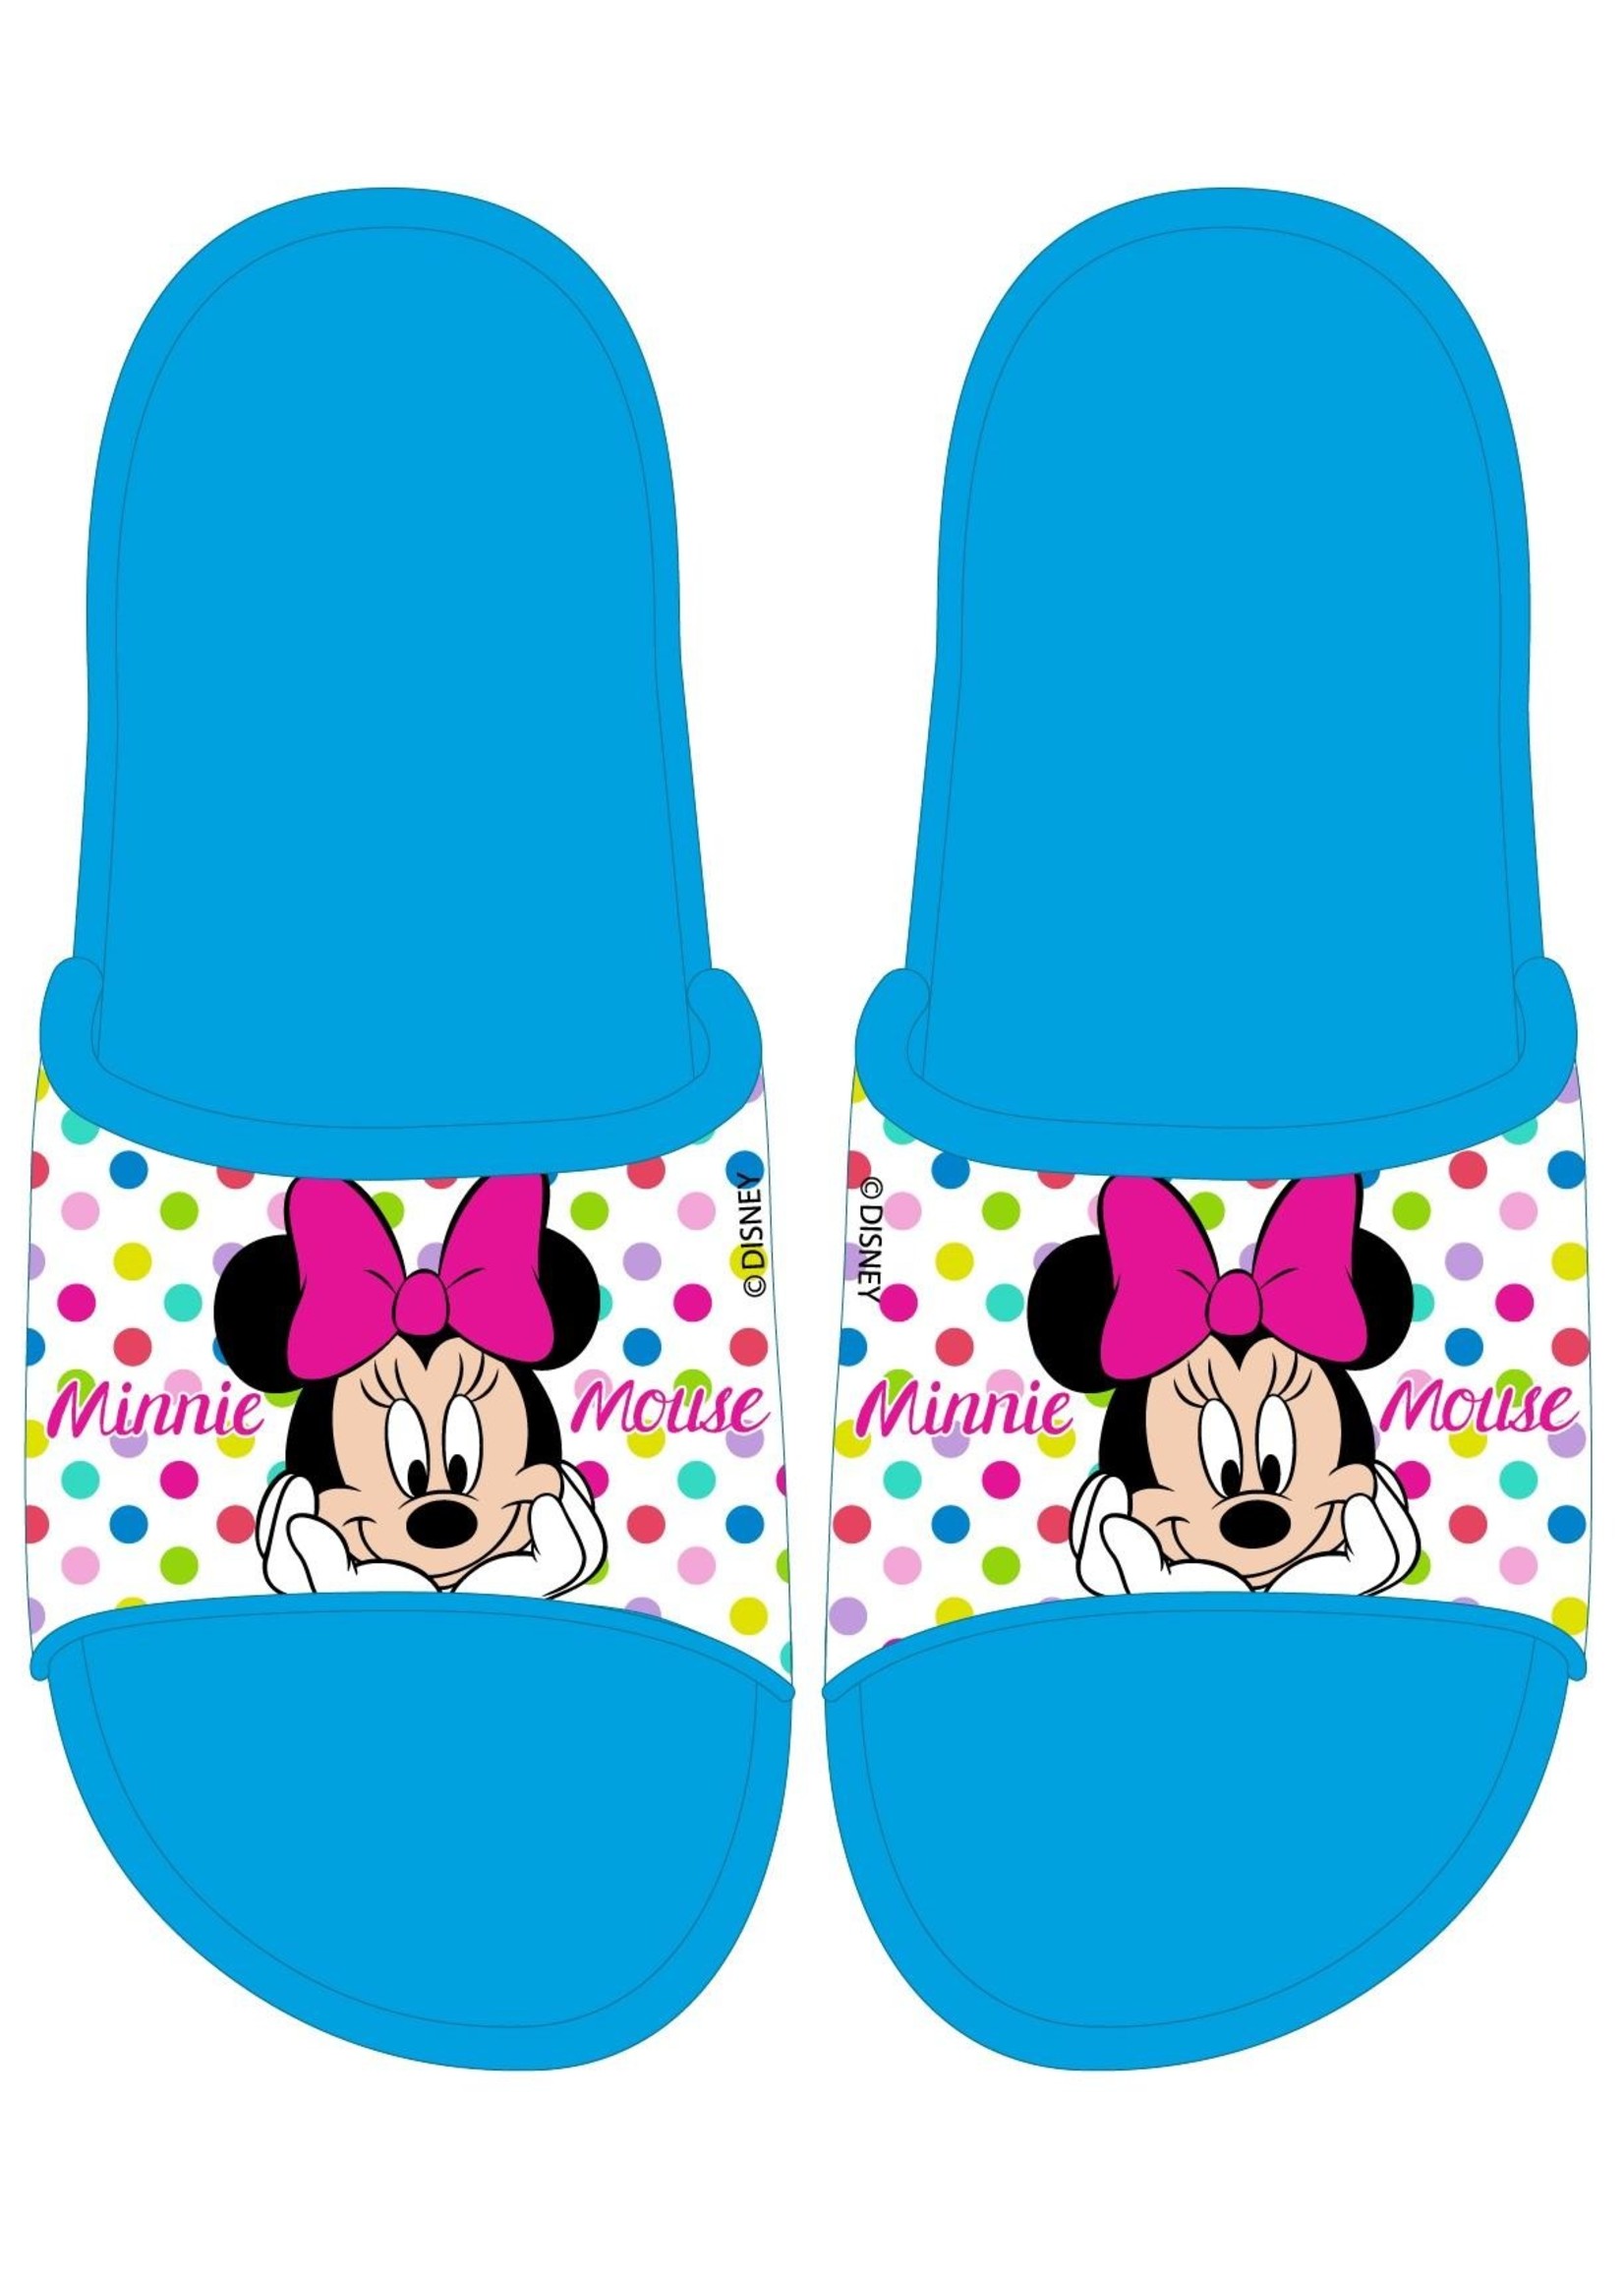 Disney Minnie Mouse bath slippers from Disney blue